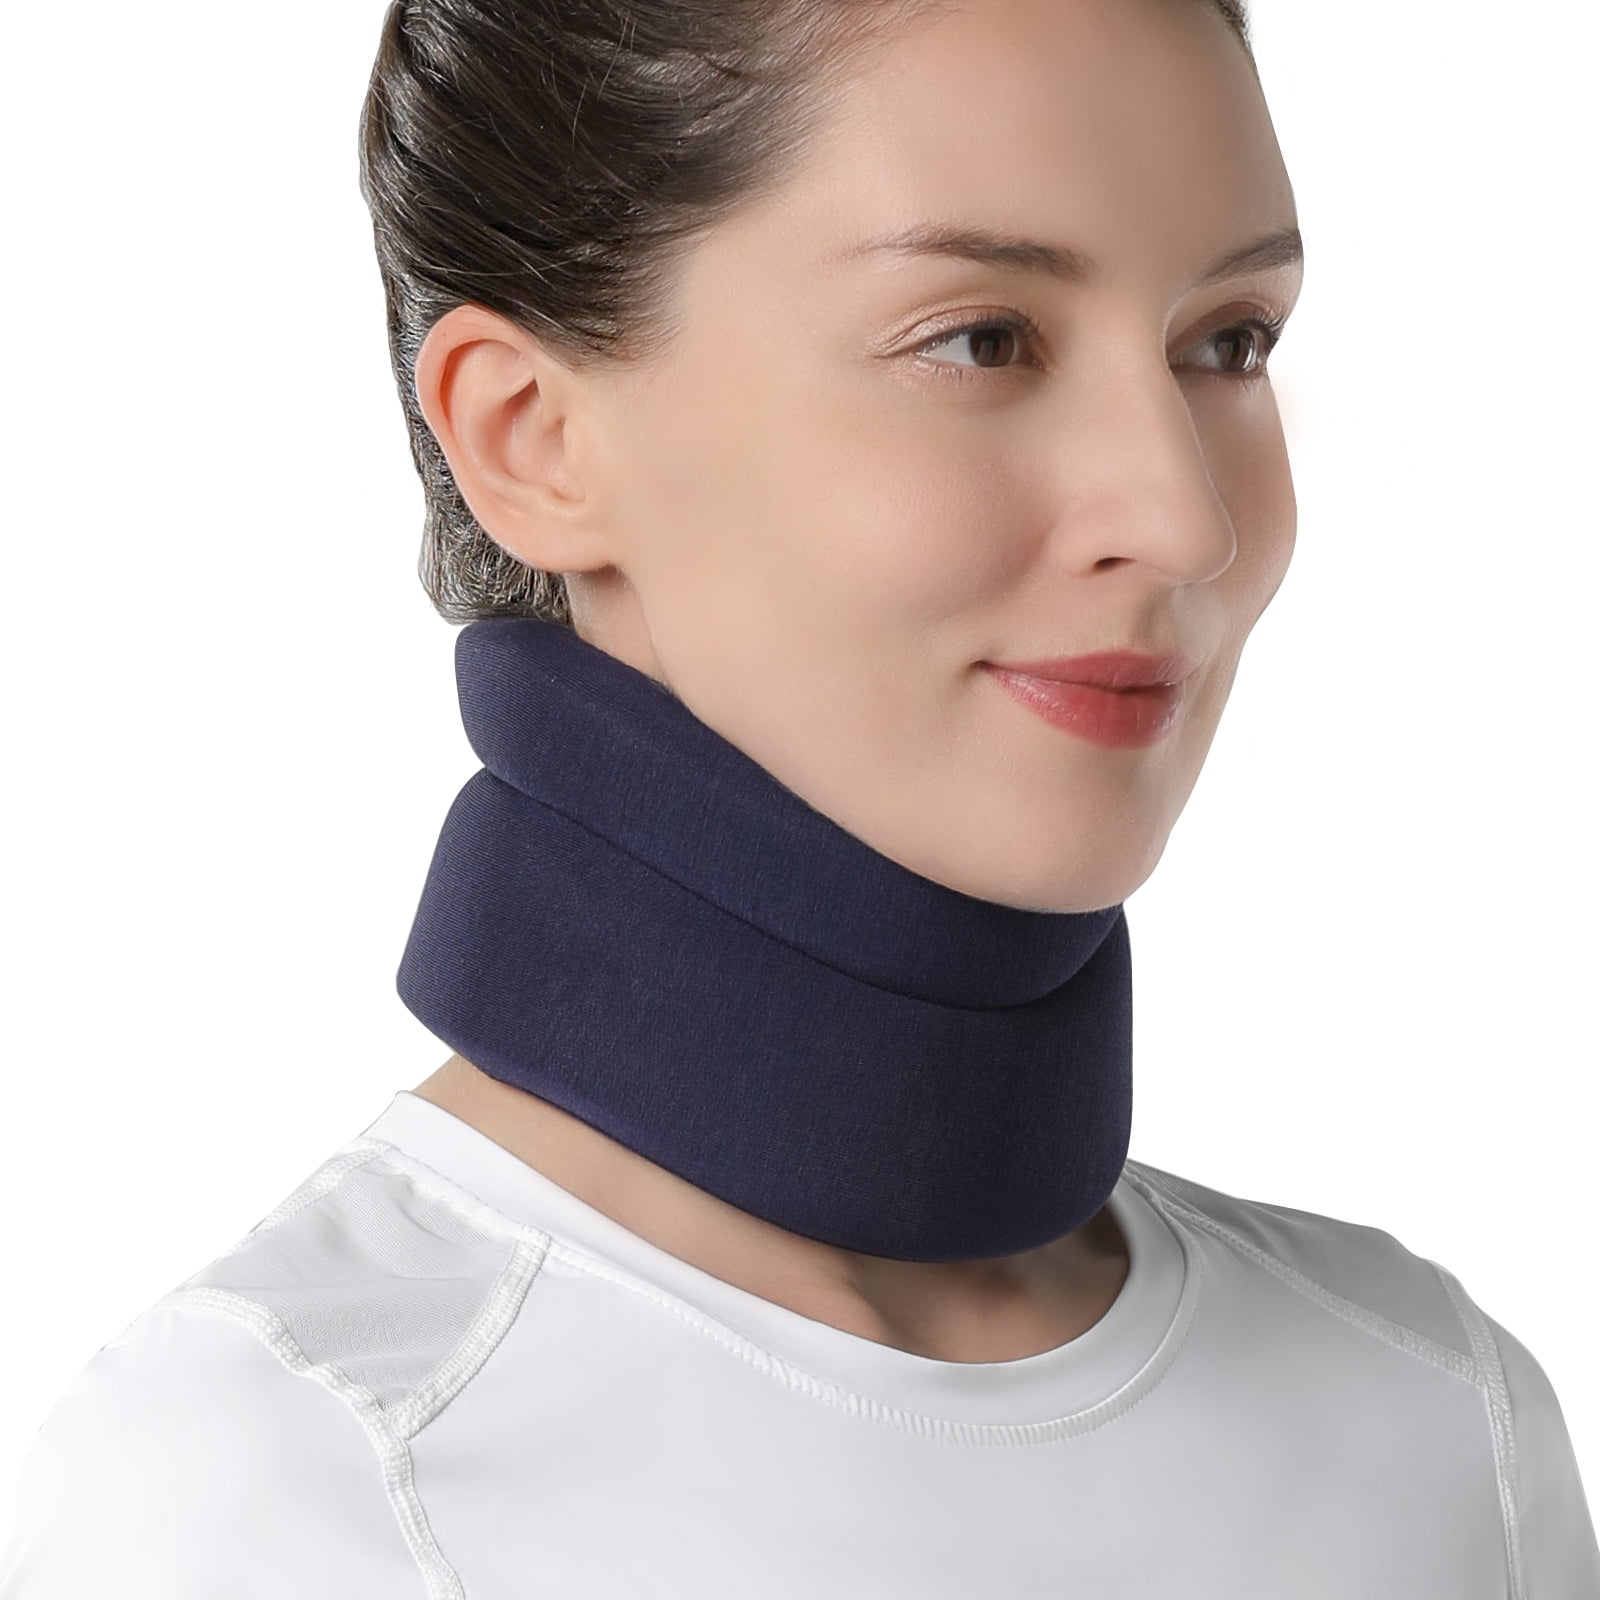 DMI Orthopedic 3 Firm Foam Contoured Cervical Collar, One Size Fits Most 